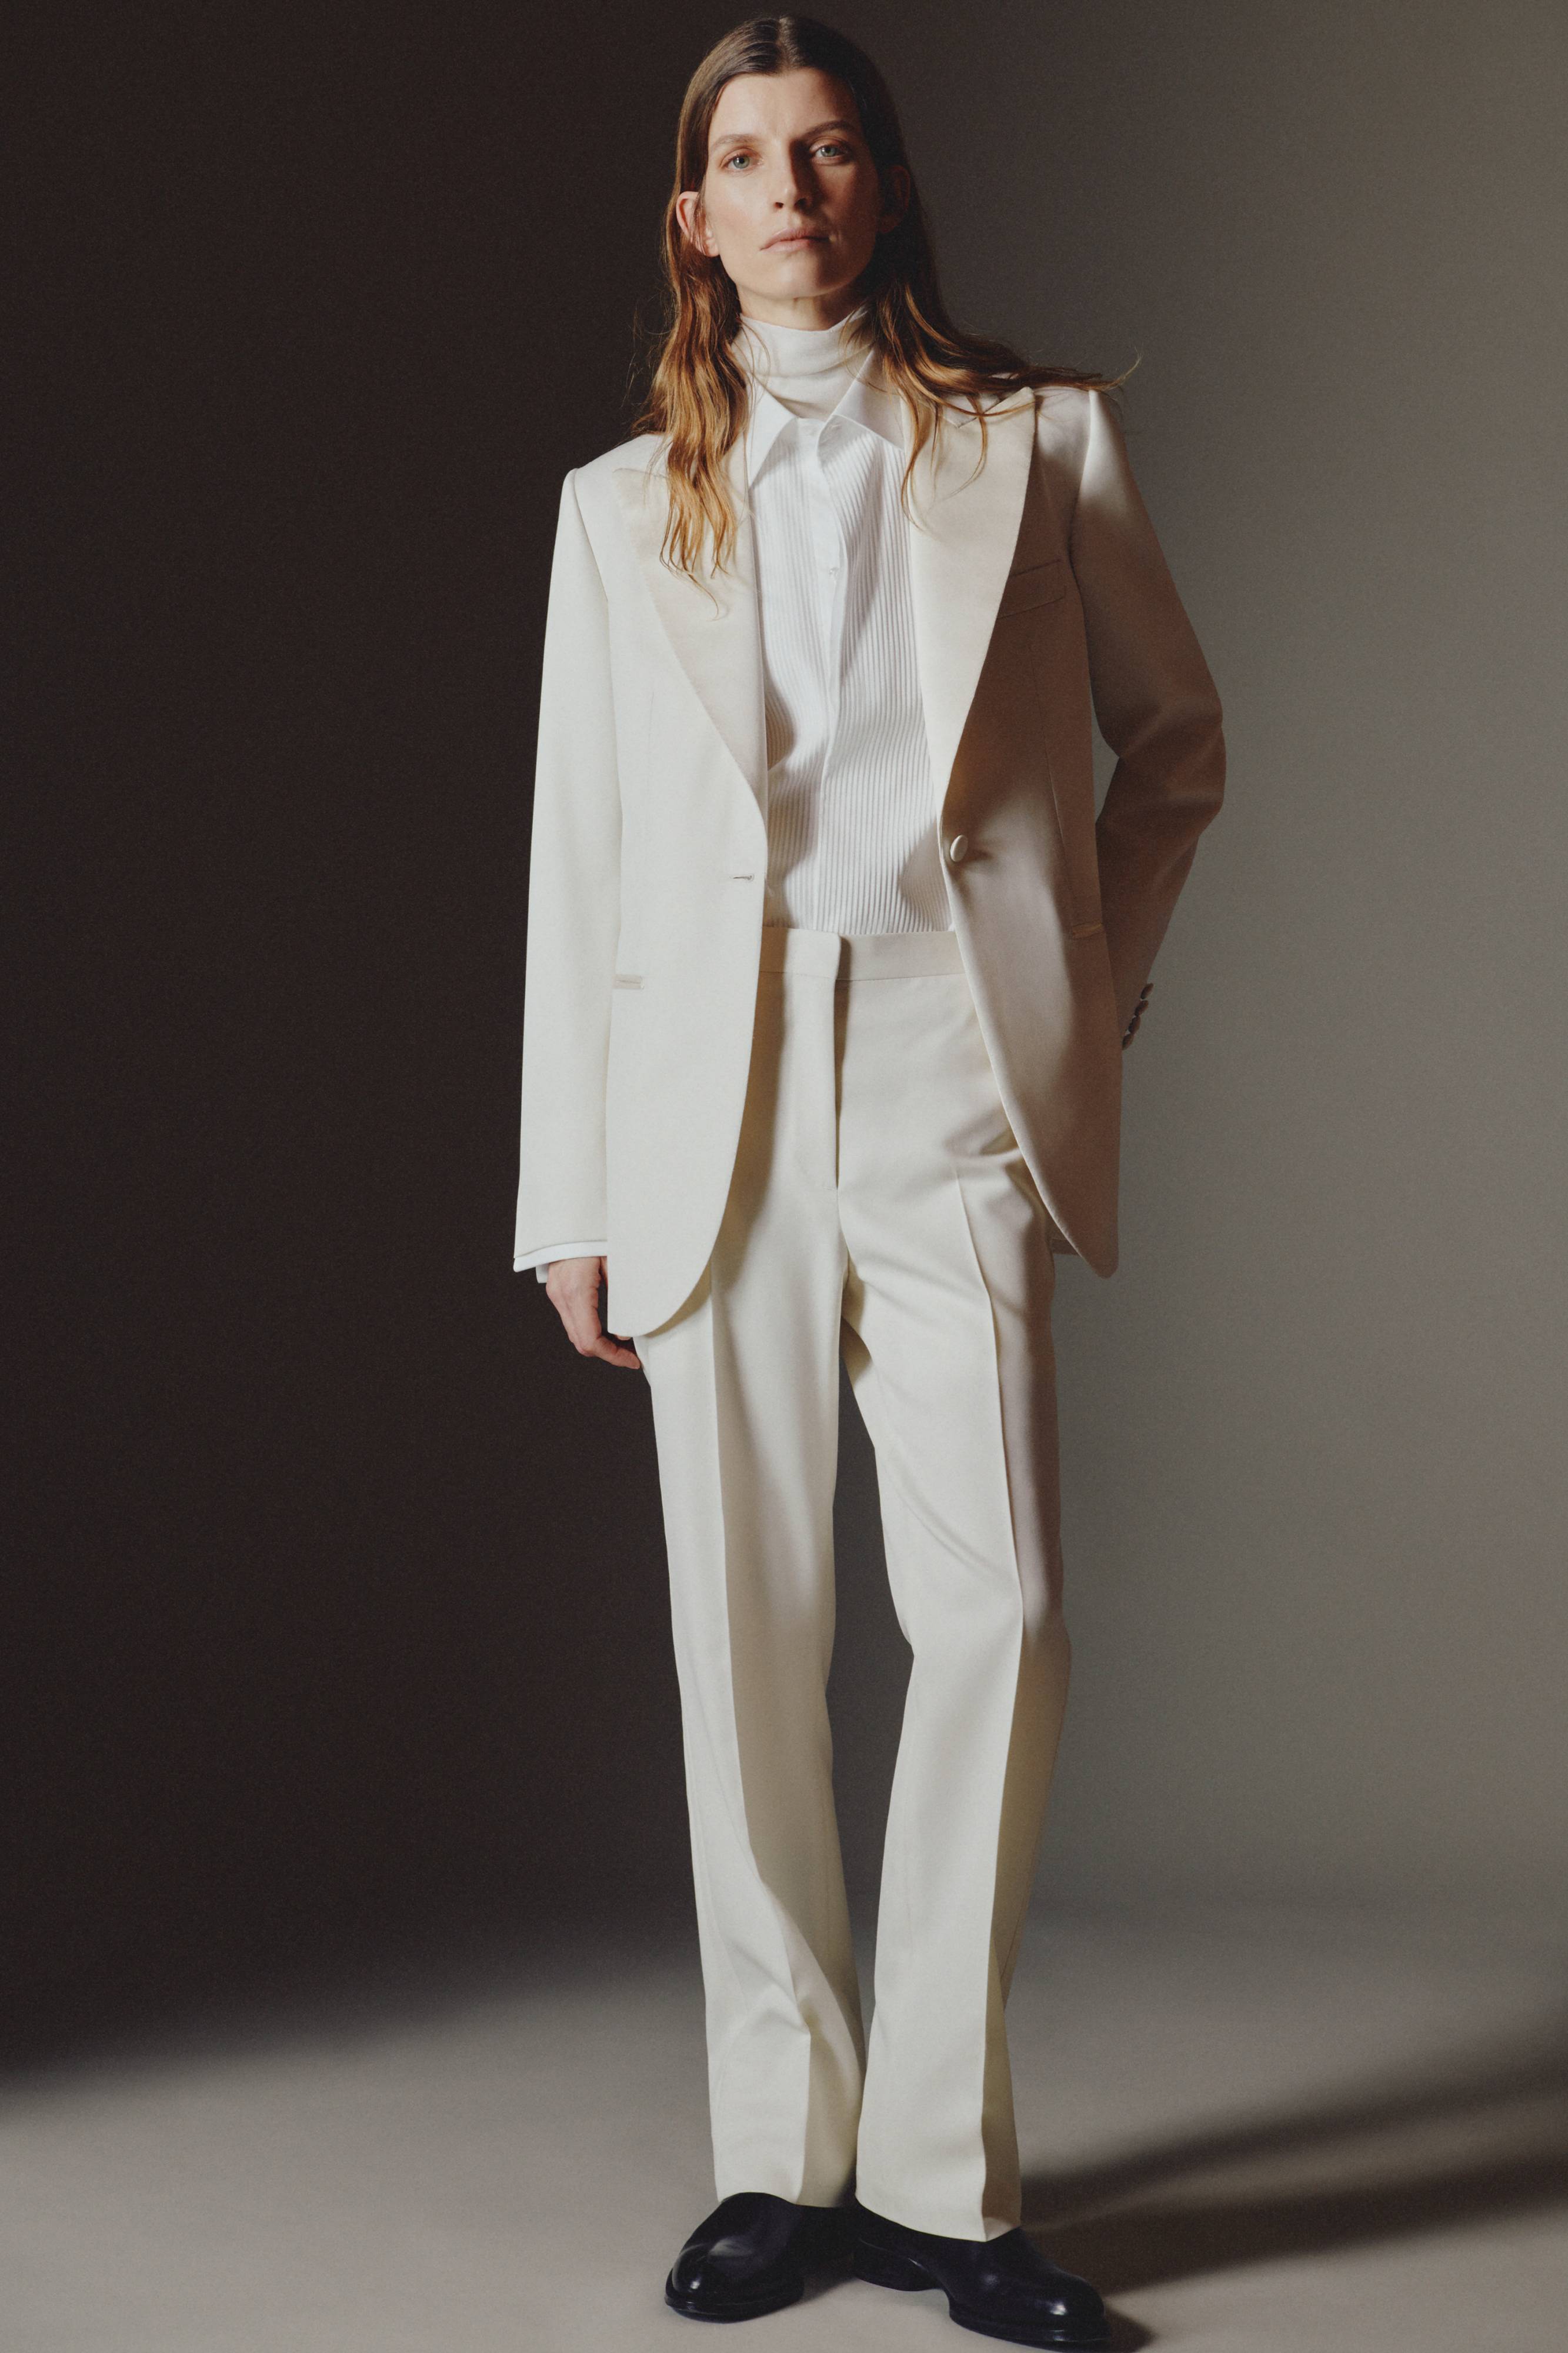 Woman model wearing white Brioni suit from capsule collection